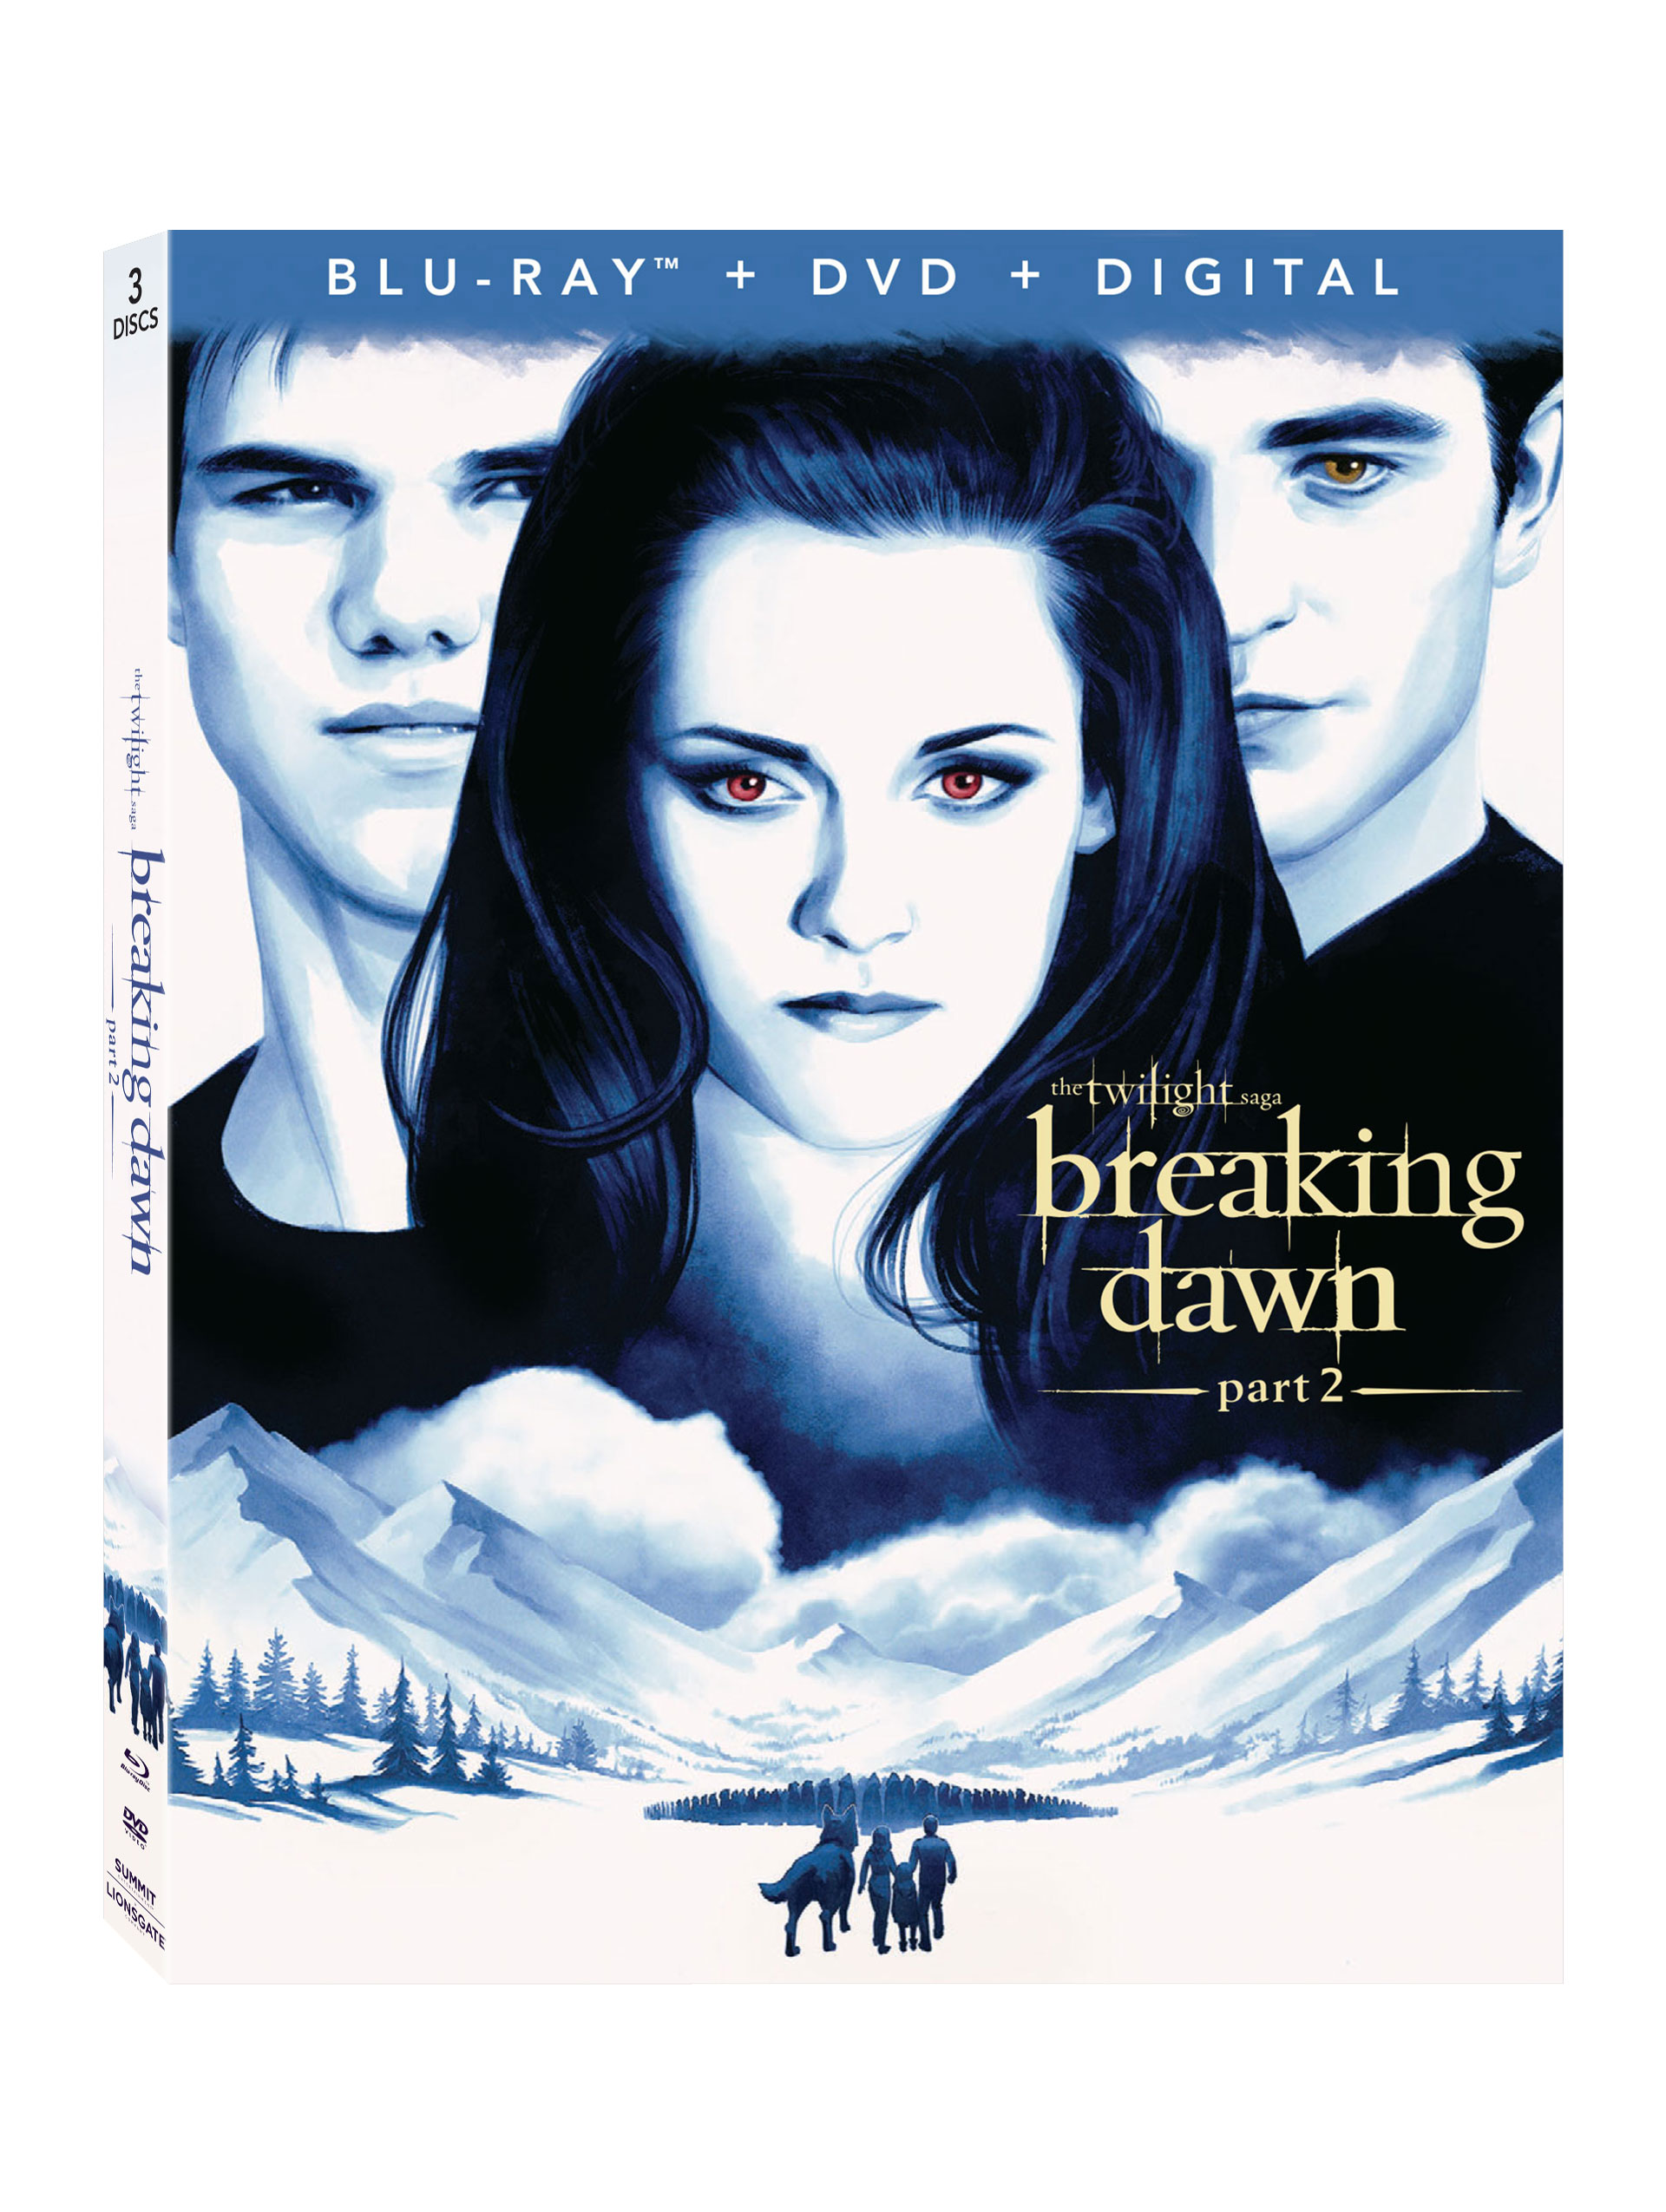 The Twilight Saga Breaking Dawn Part 2 Blu-Ray Combo Pack Cover (Lionsgate Home Entertainment)